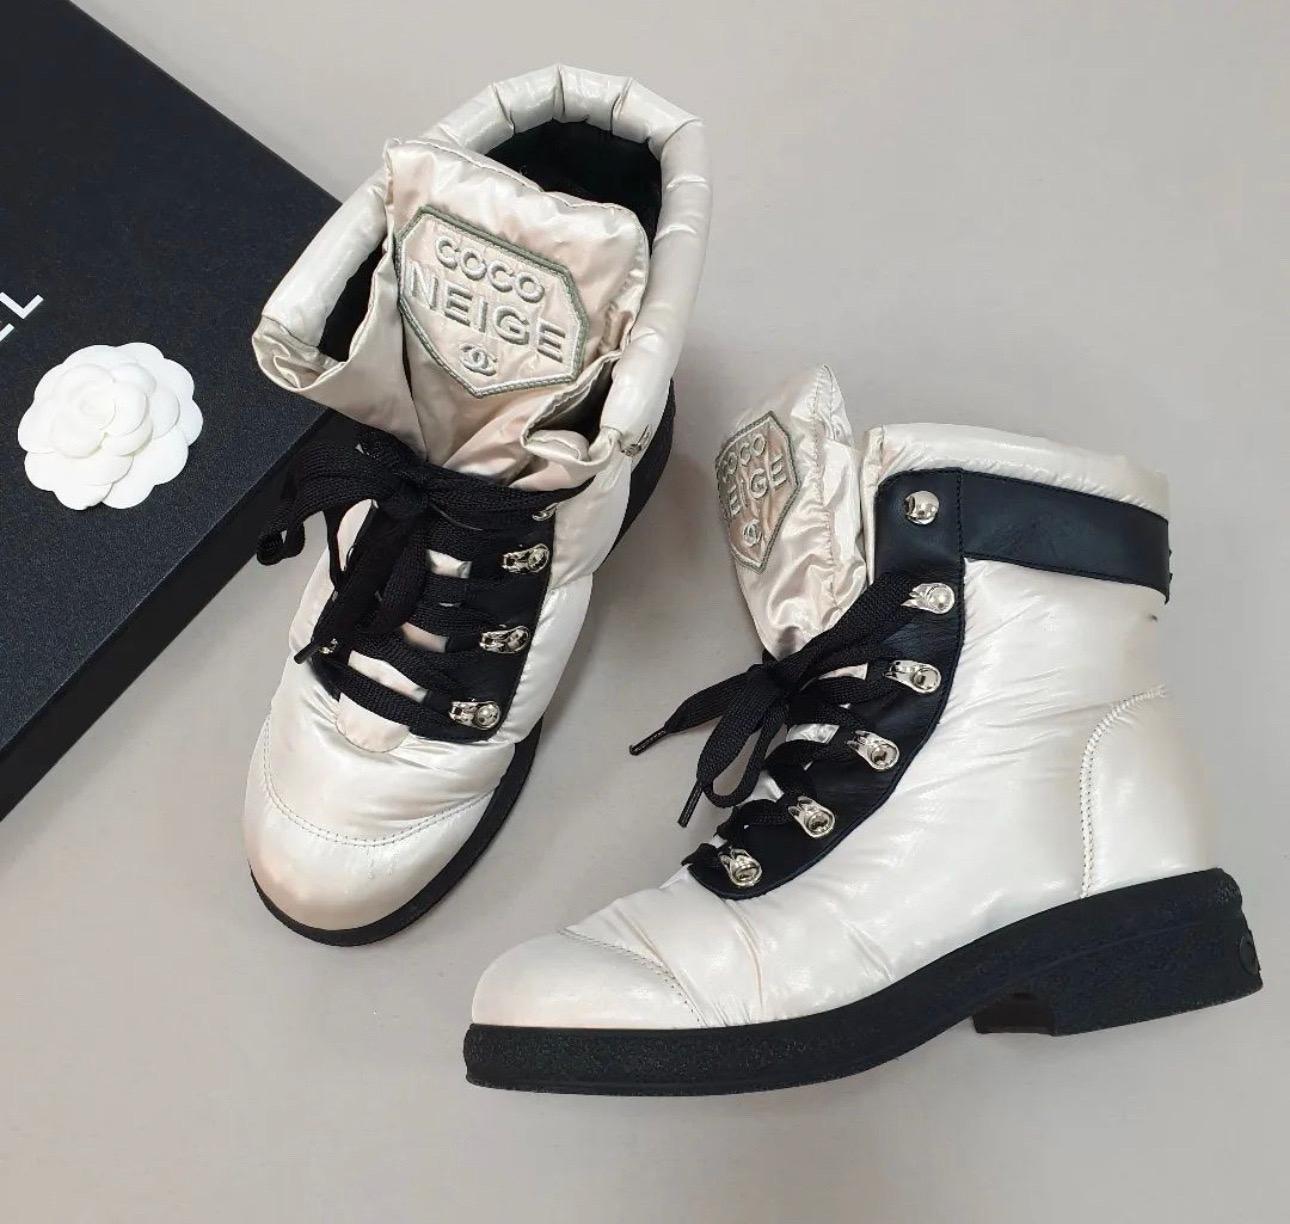 CHANEL Coco Neige Cream Leather Winter Walking Short Boots 

Hitting the slopes of Niseko or Bear Mountain has become an increasingly trendy travel option. 
How about doing so in  lambskin mountain boots that marries high fashion with function?